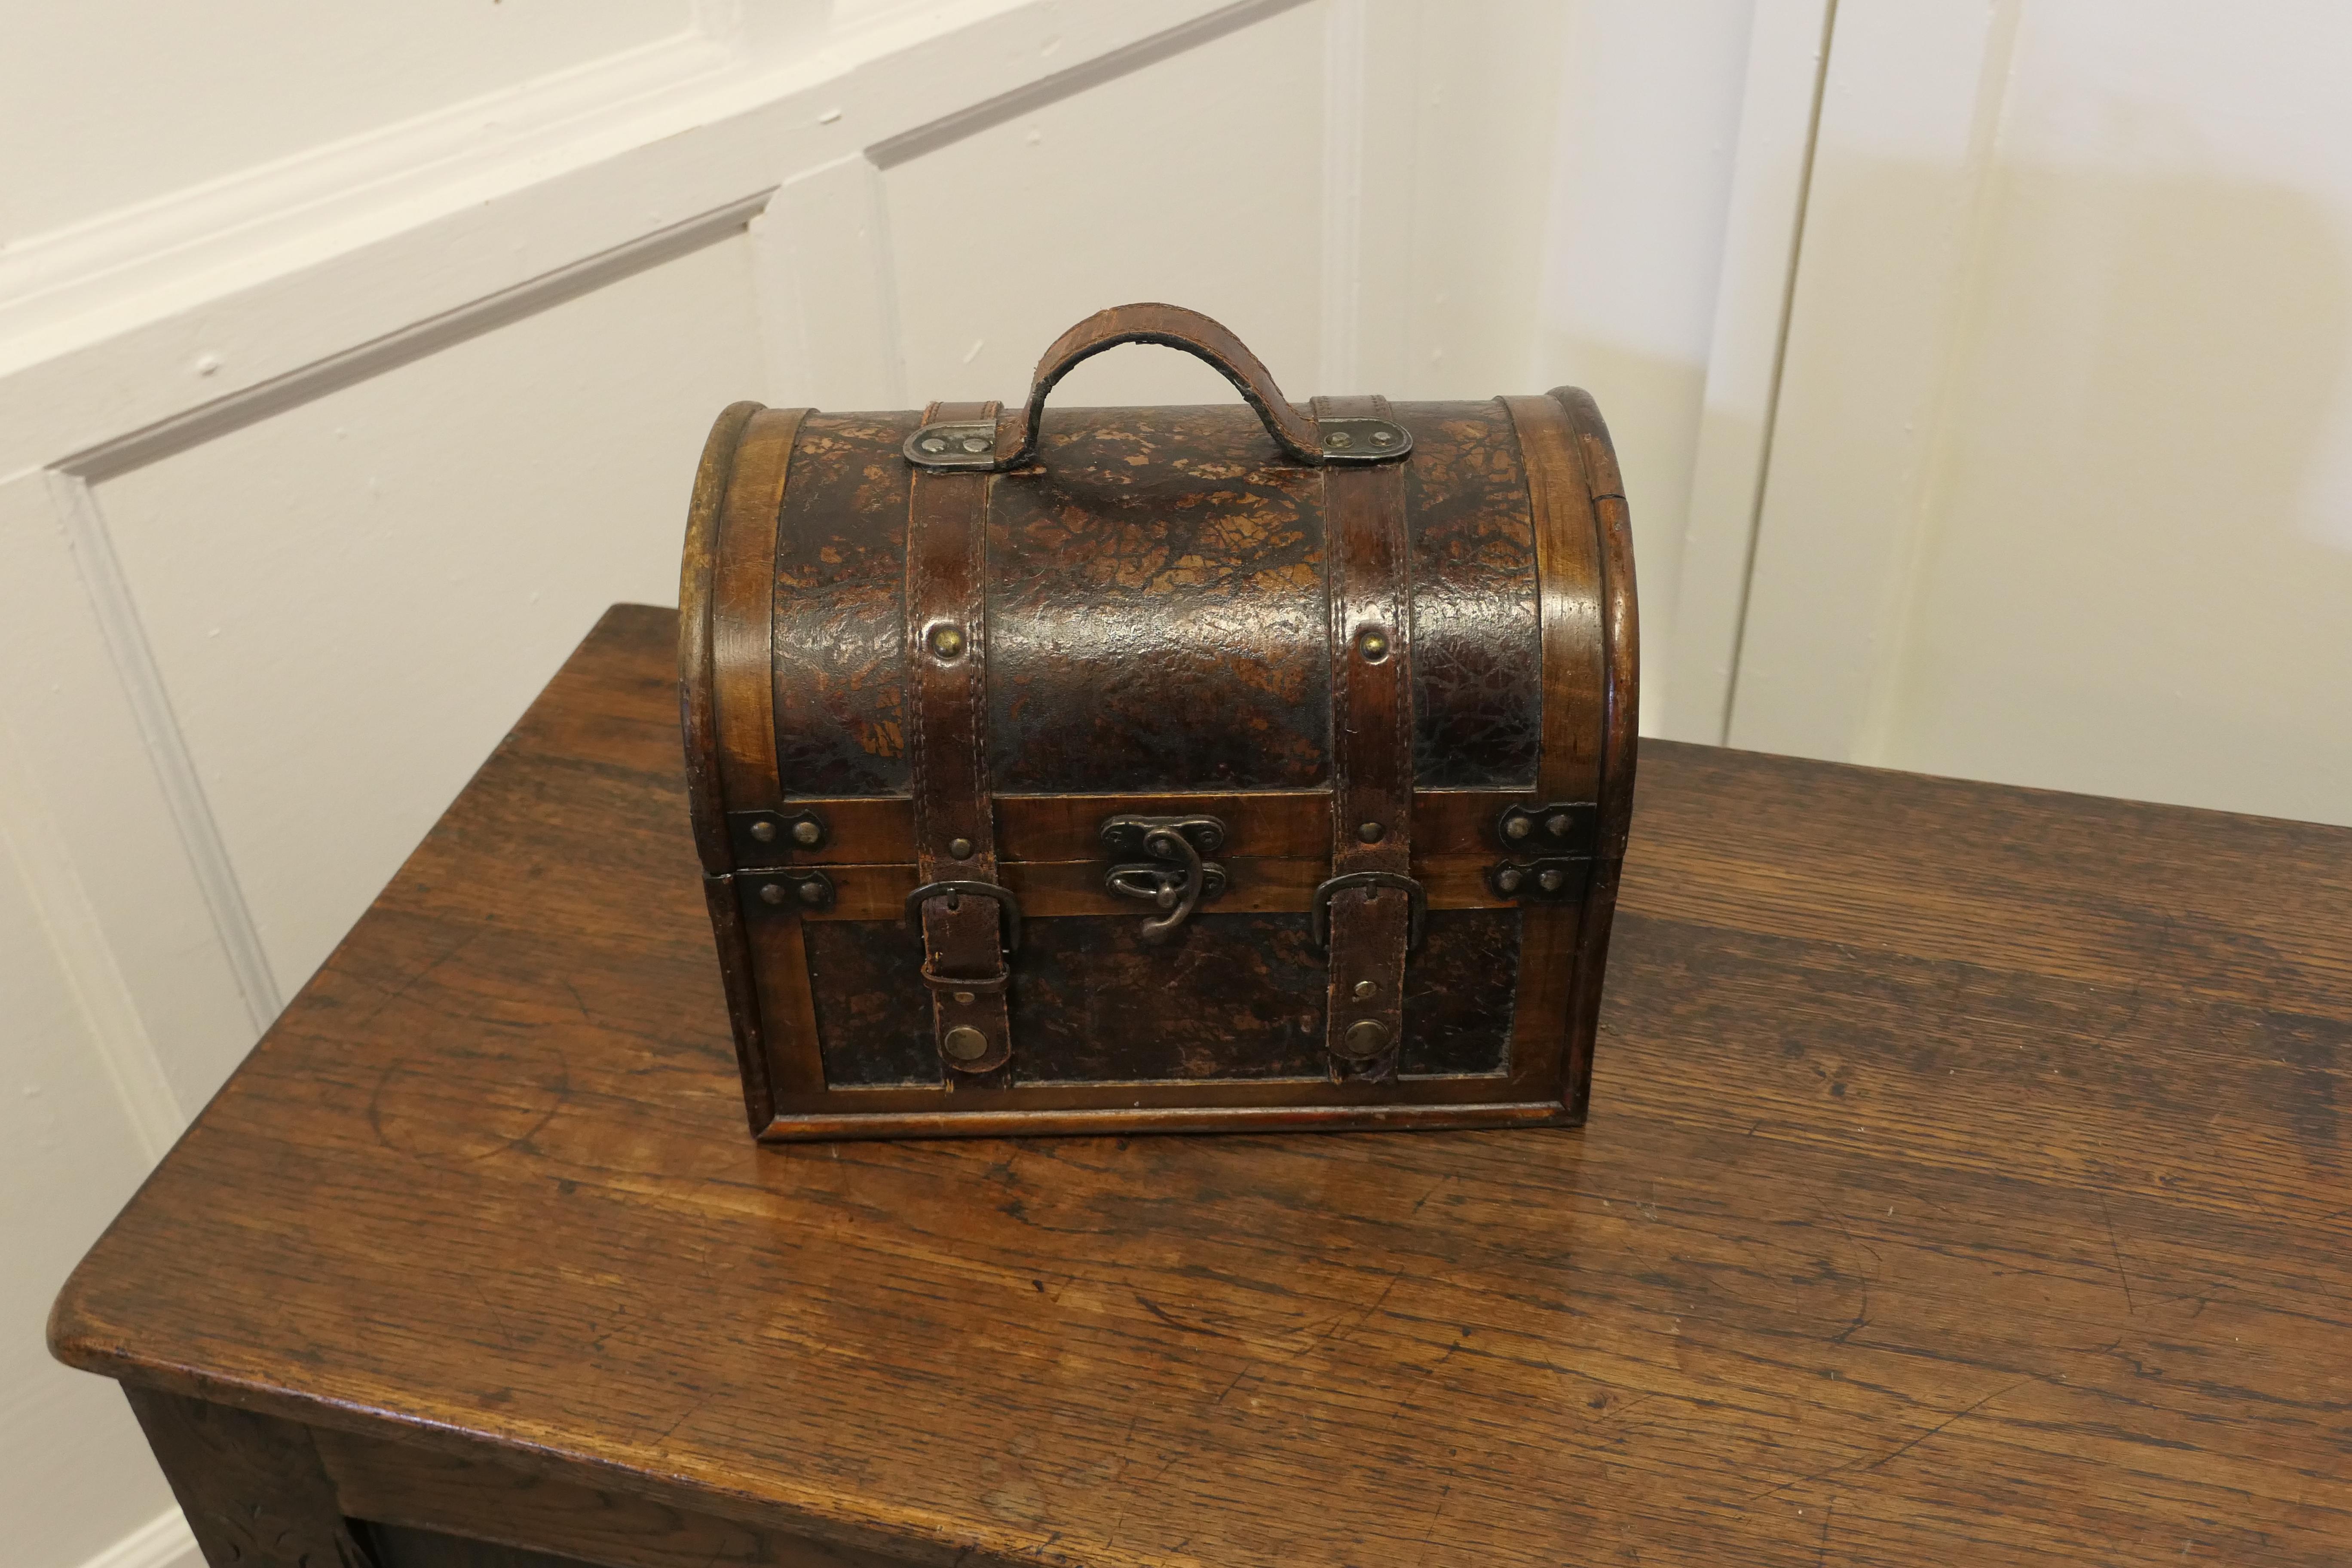 Gladstone bag treasure chest box.

Designed to look like a Gladstone bag, this useful little storage box, would make an excellent jewellery or treasure chest. 
Made in wood and Leather and in good lightly used condition.
The box is 10” tall, 12”